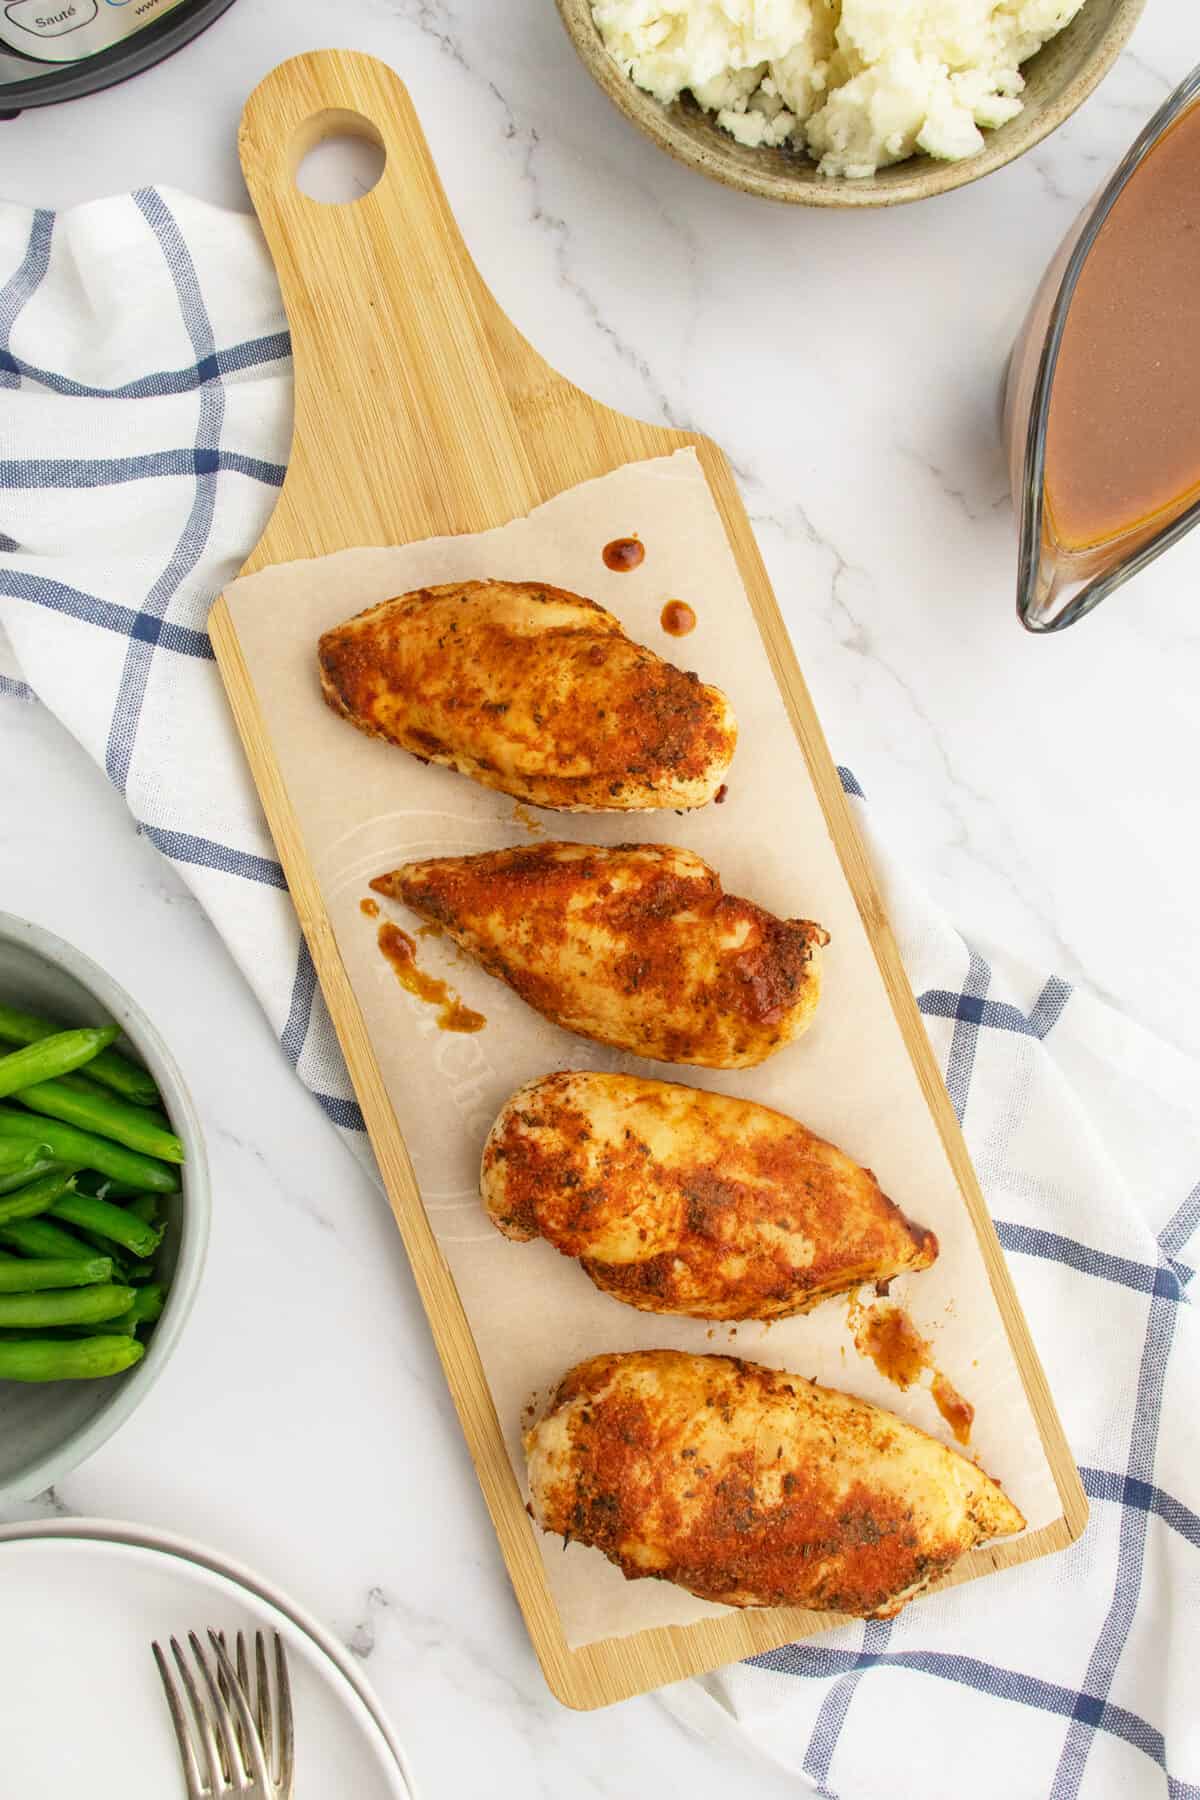 Chicken Breast lined up on cutting board